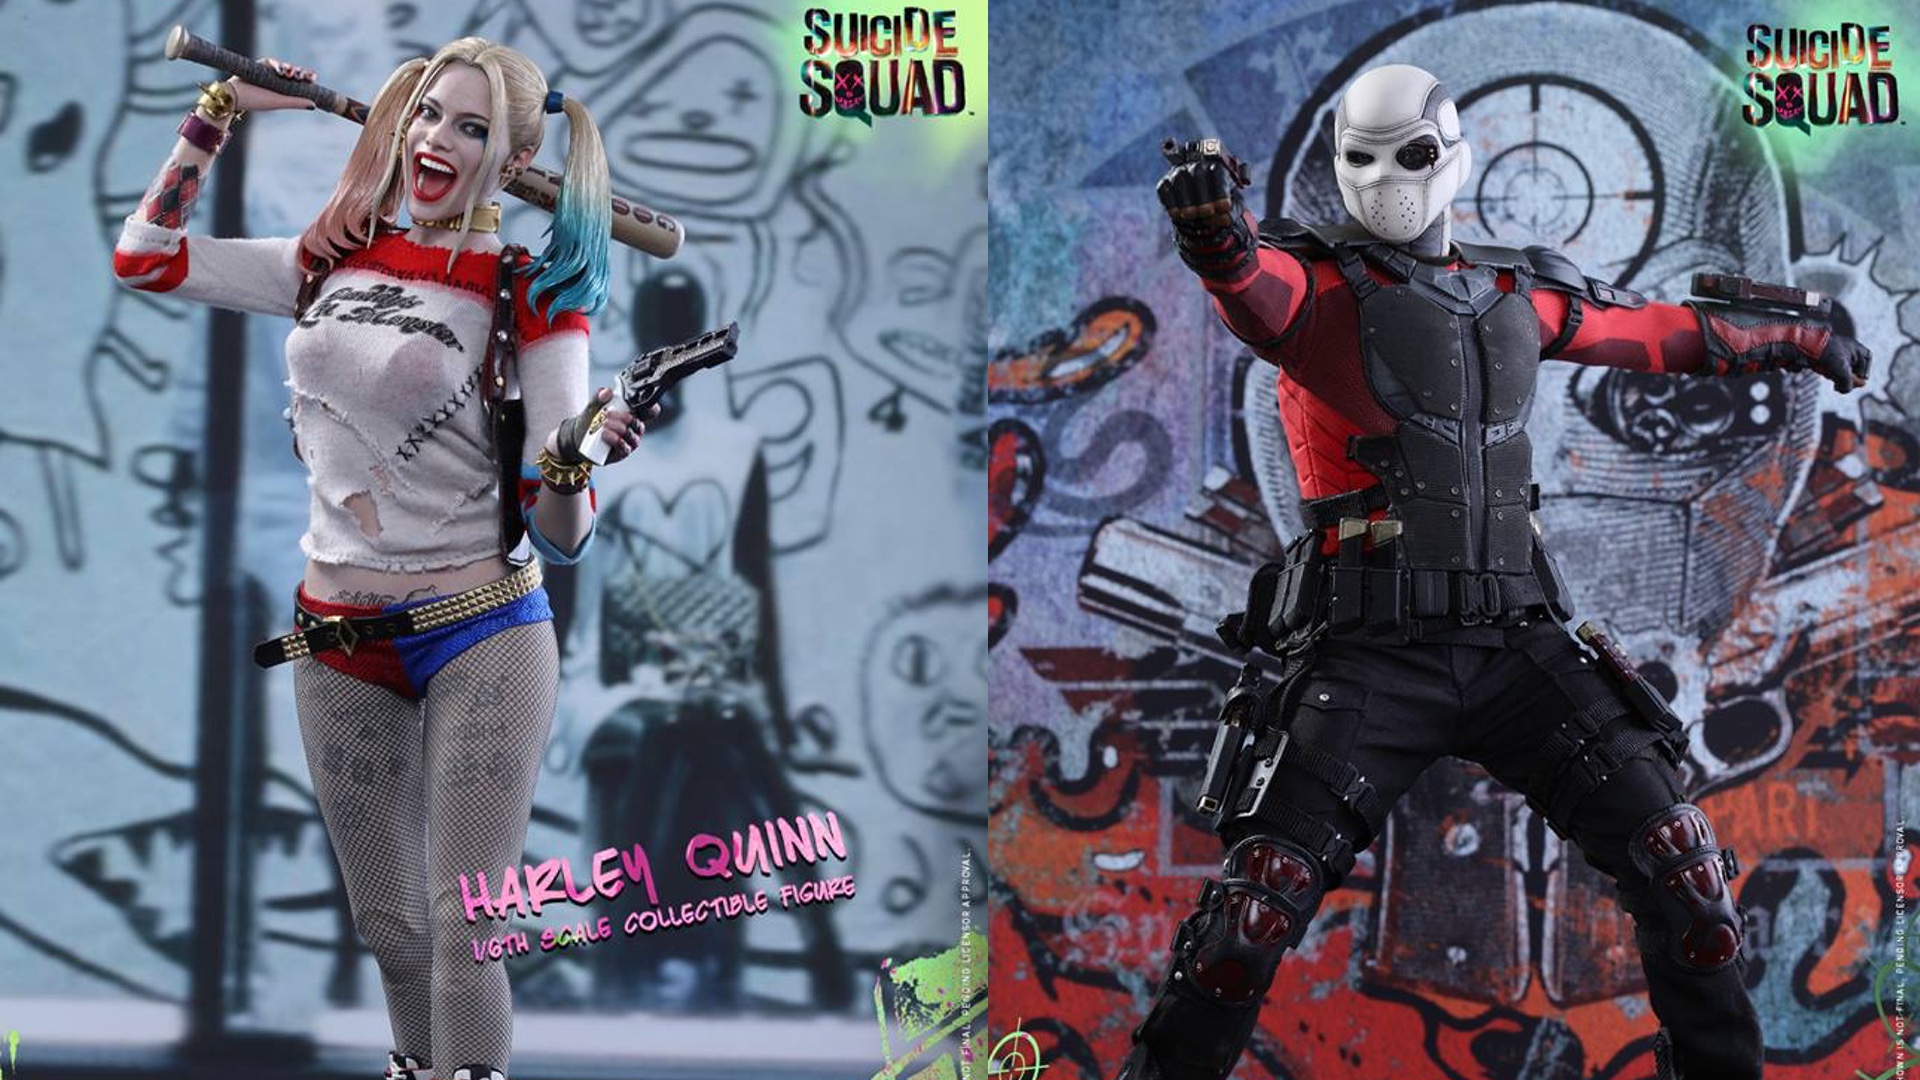 Hot Toys Suicide Squad Harley Quinn